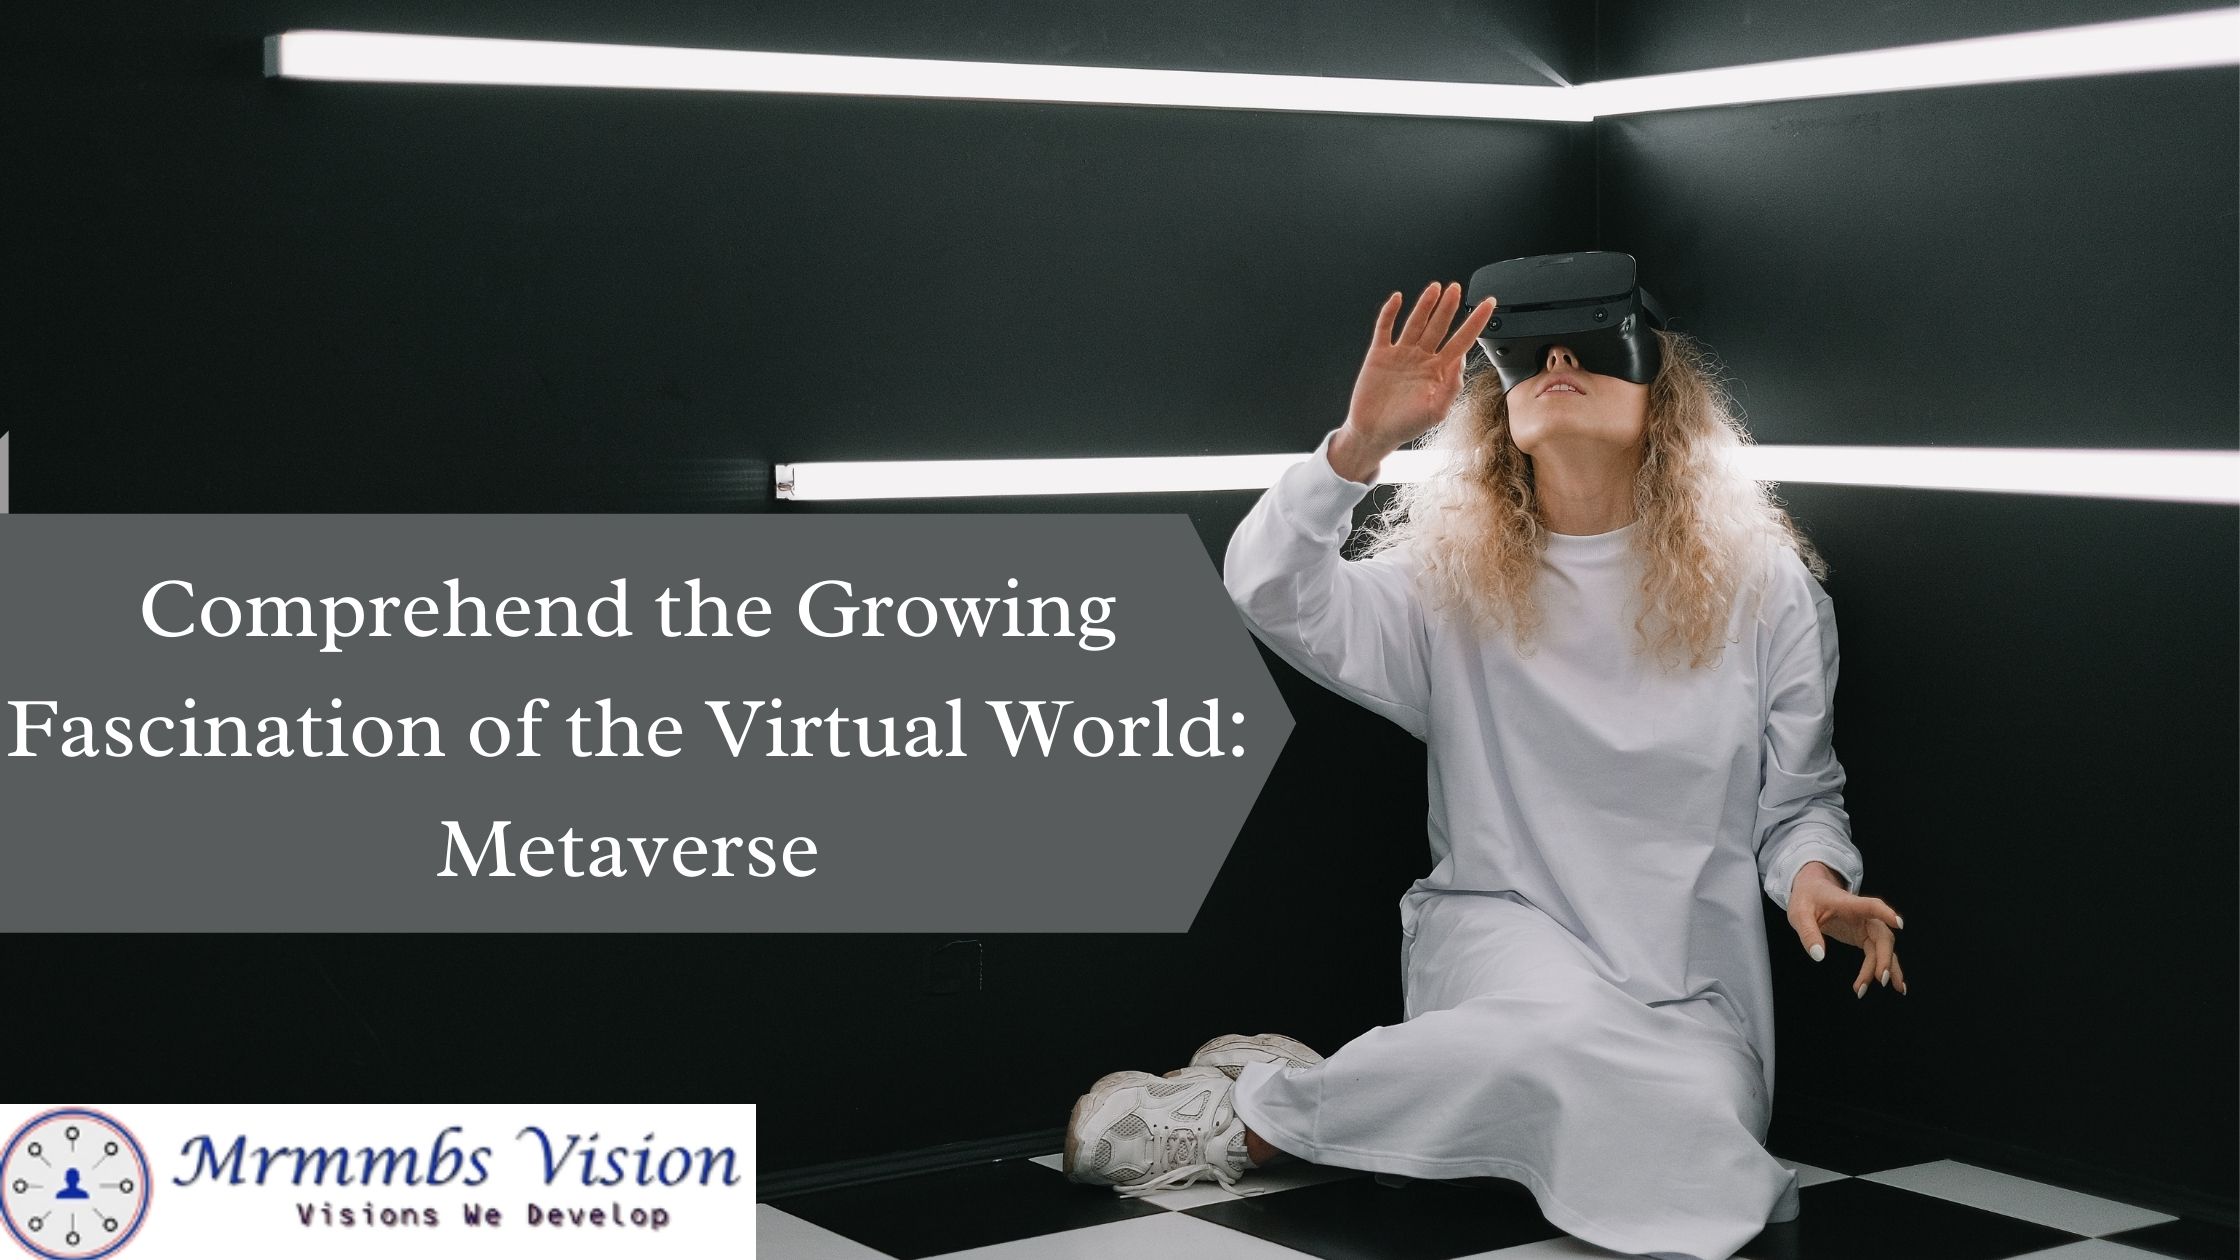 Comprehend the Growing Fascination of the Virtual World: Metaverse